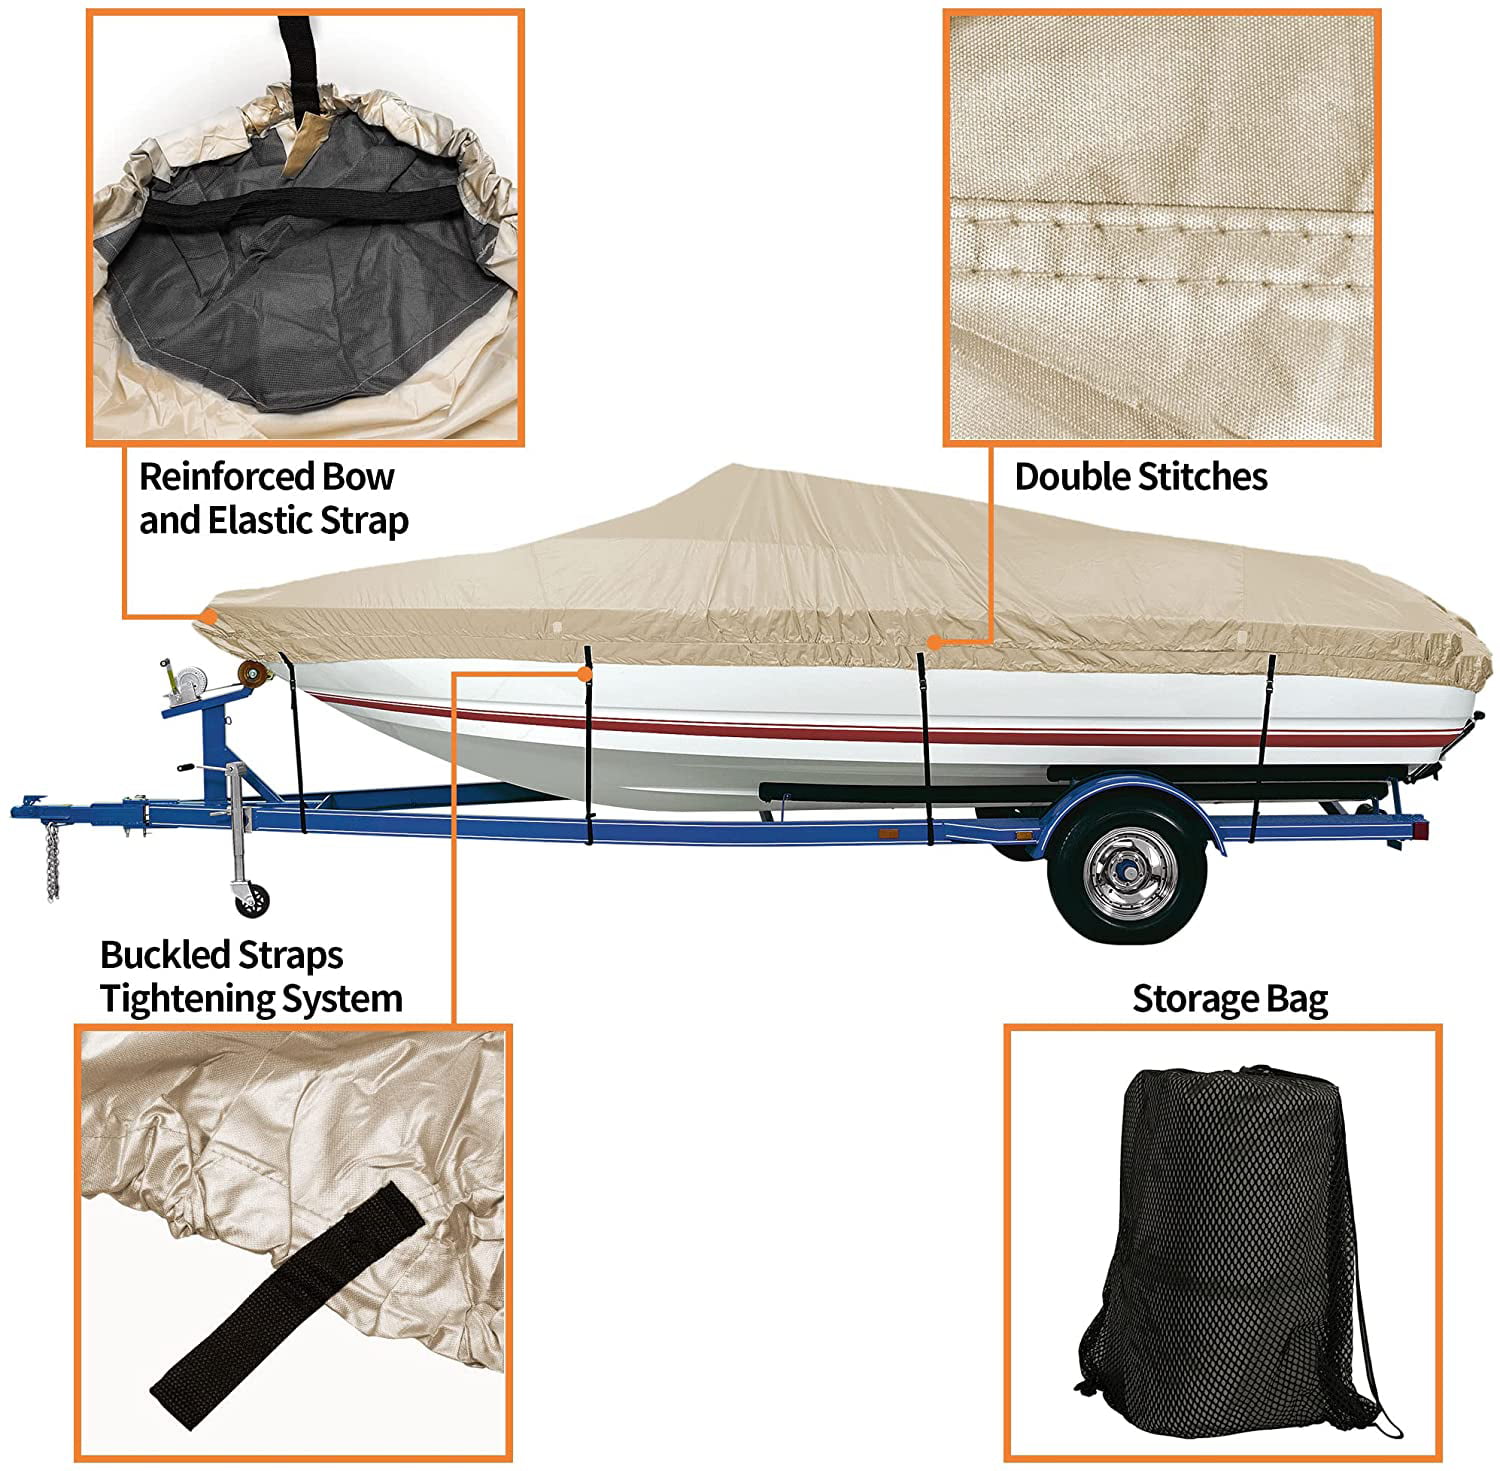 Heavy Duty Waterproof UV Resistant Marine Grade Polyester Fits V-Hull,TRI-Hull,Pro-Style,Fishing Boat,Runabout,Bass Boat iCOVER Trailerable Boat Cover 